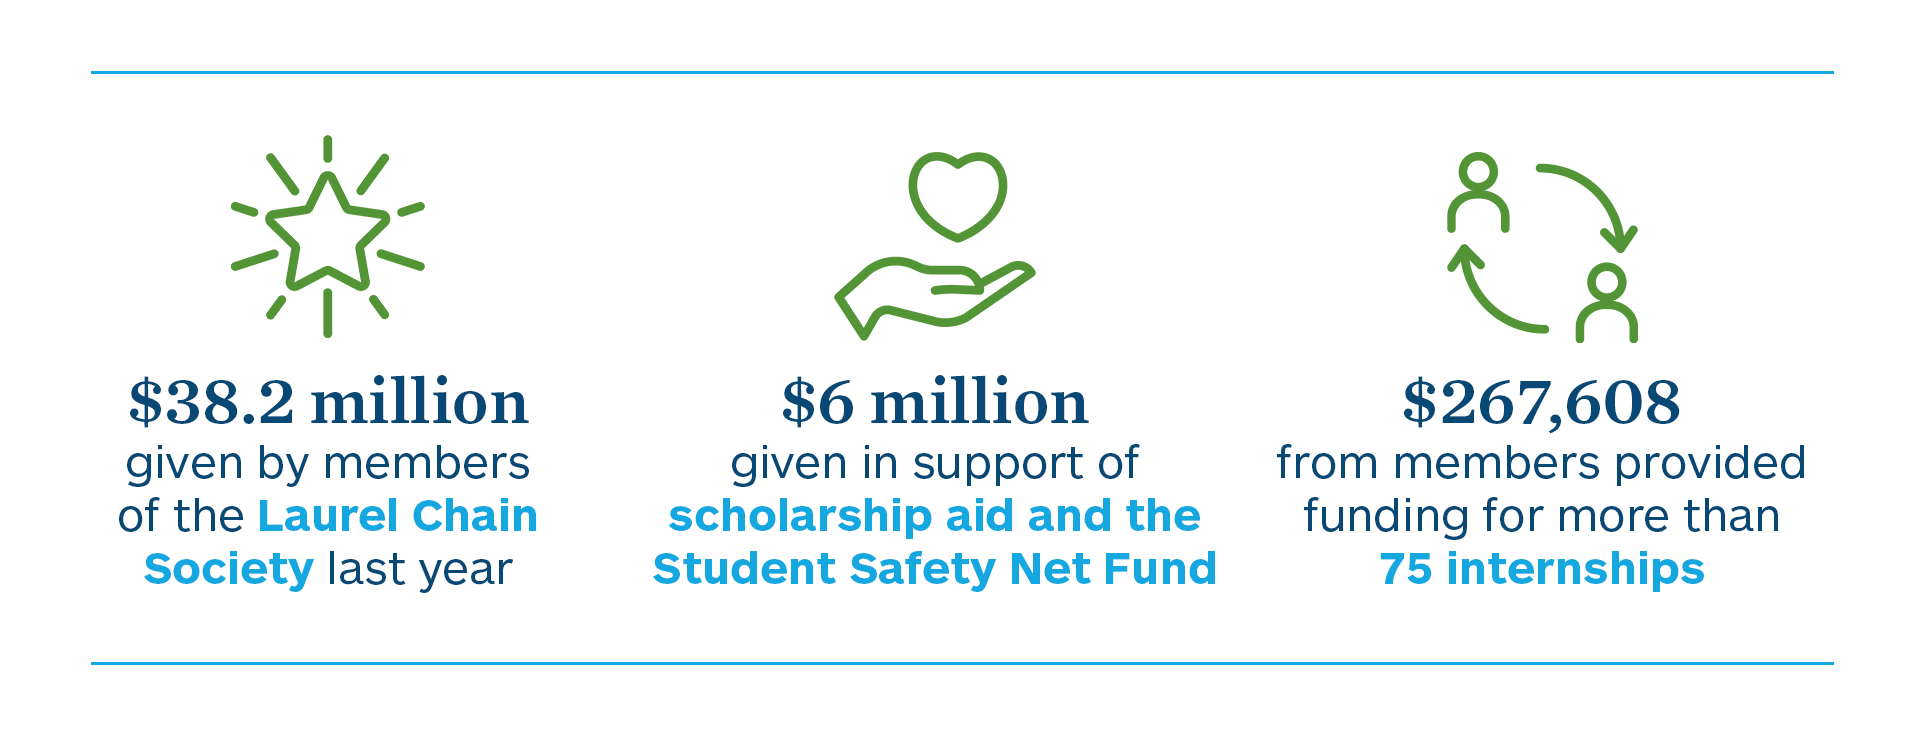 $38.2 million given by members of the Laurel Chain Society last year | $6 million given in support of scholarship aid and the Student Safety Net Fund | $267,608 from members provided funding for more than 75 internships